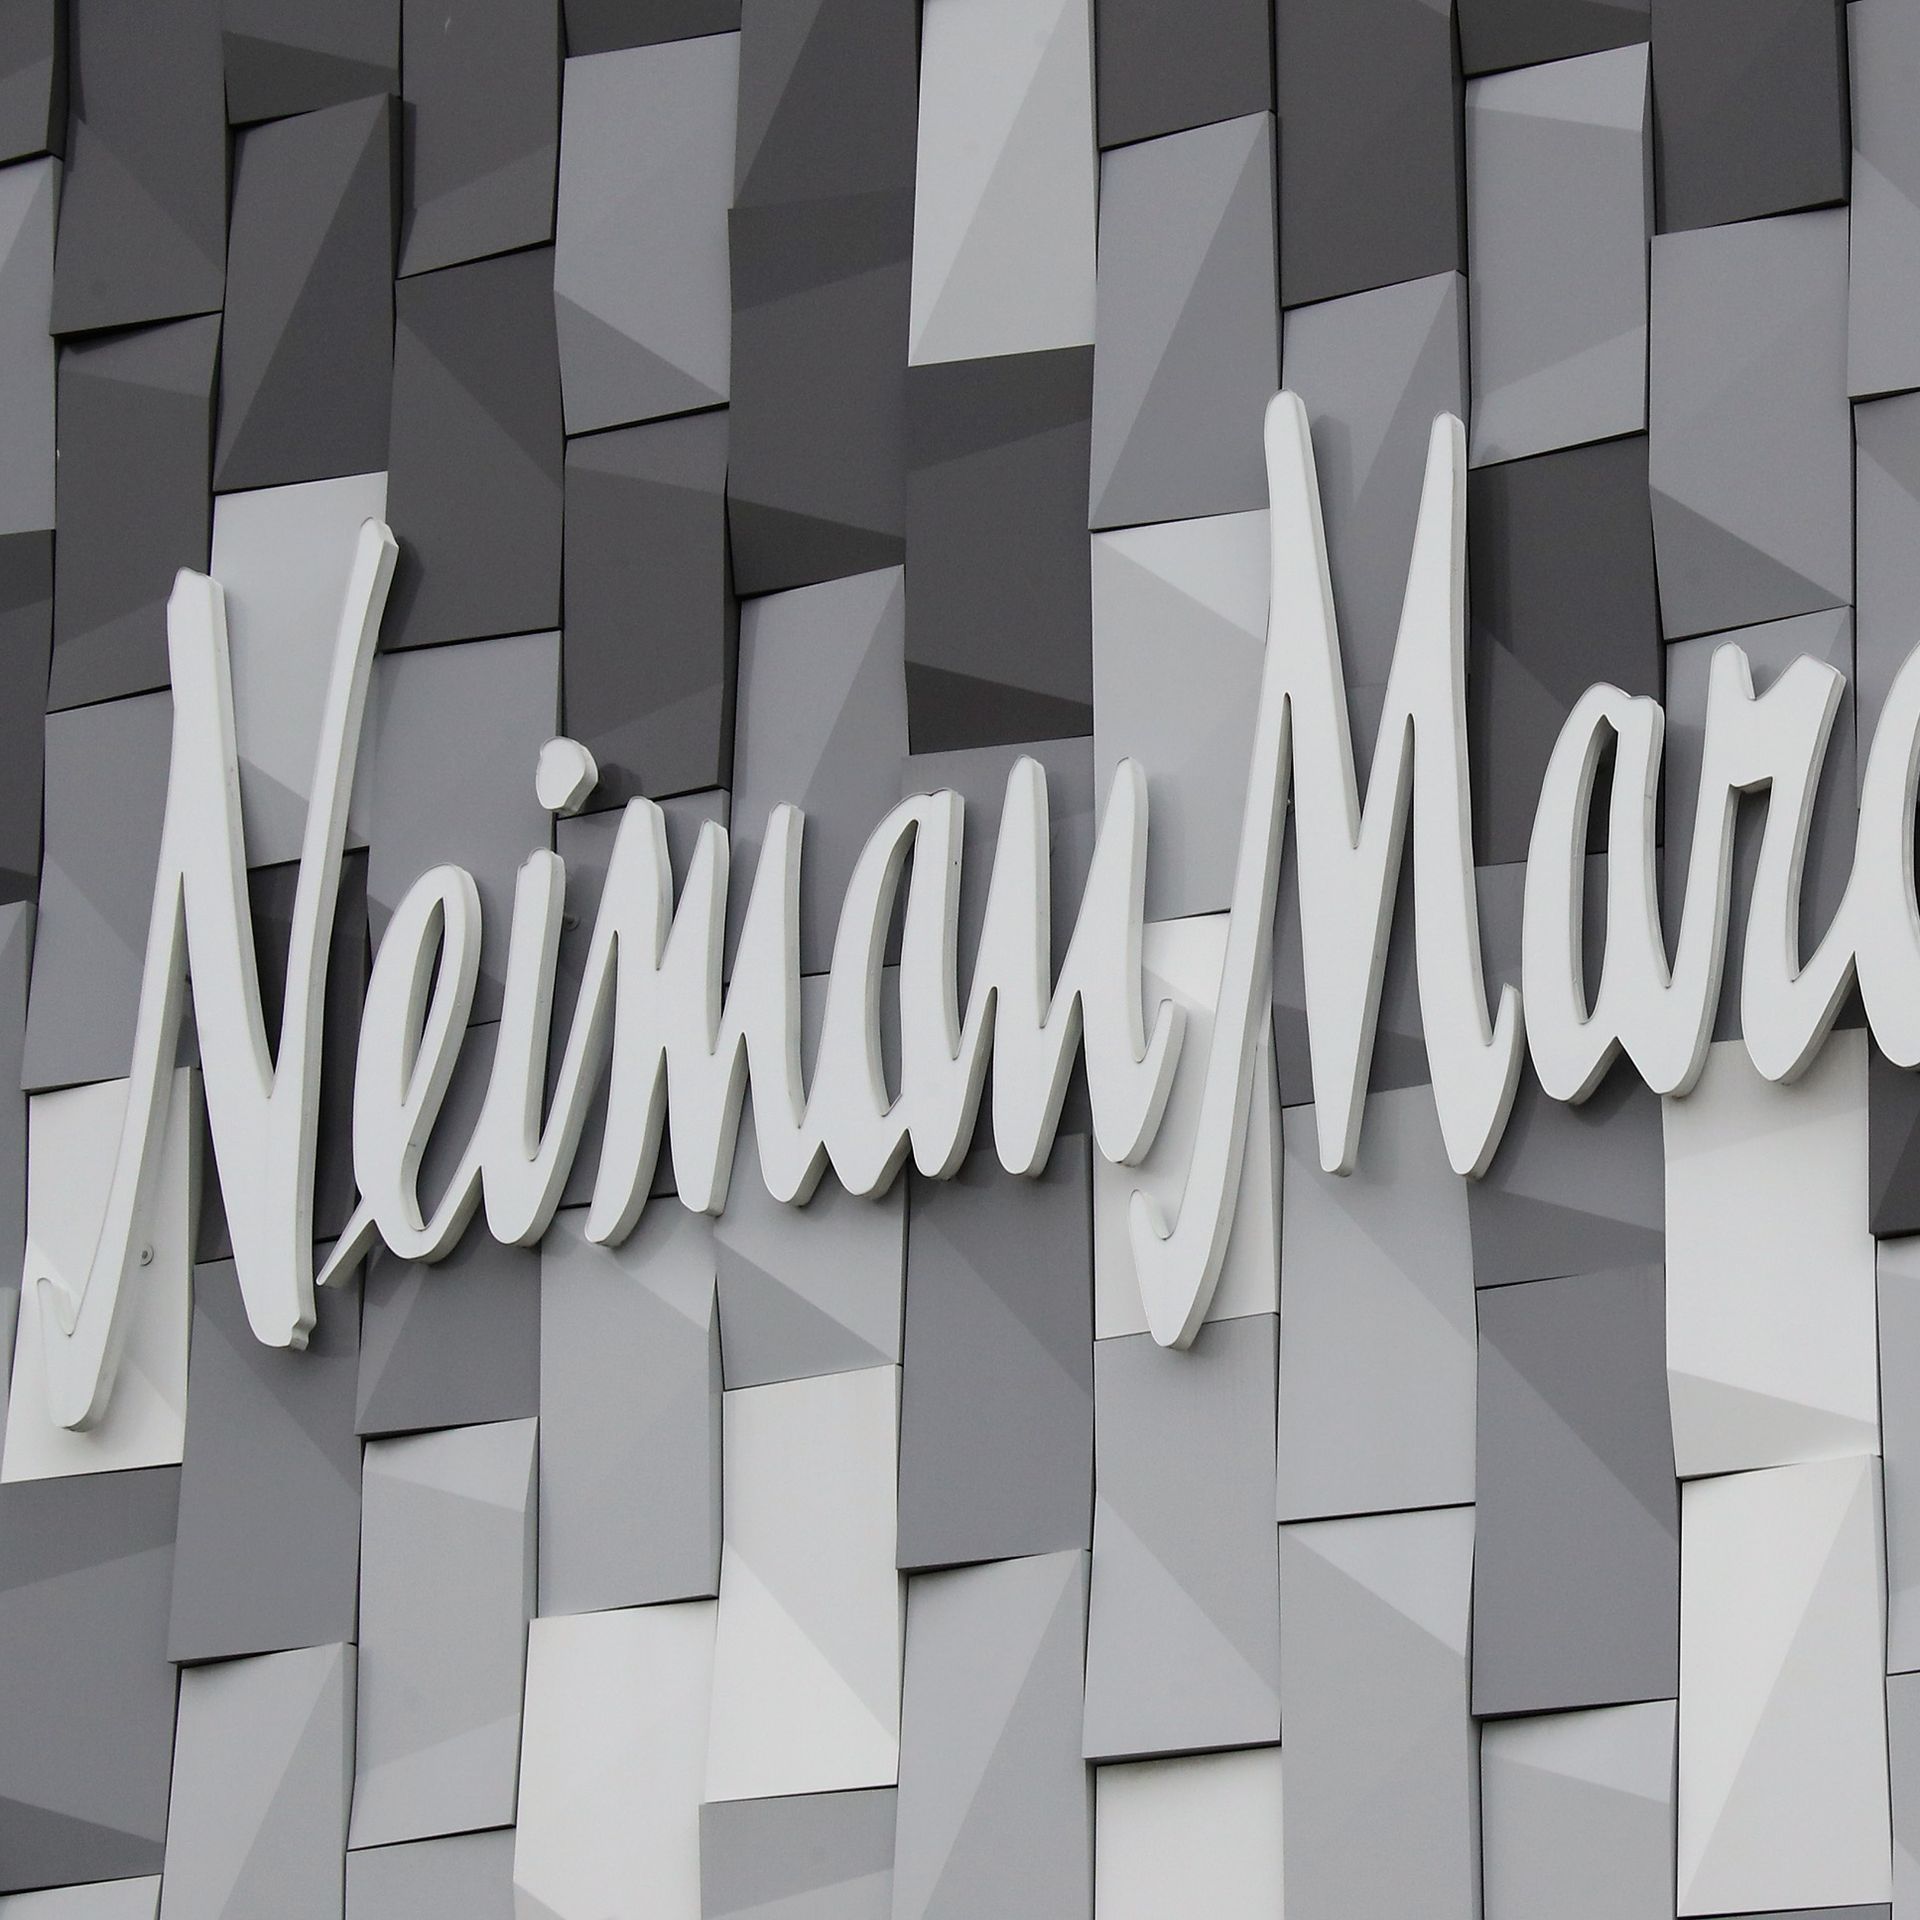 Neiman Marcus Sales Hit by Disappearing Tourists, Oil Patch Problems – WWD